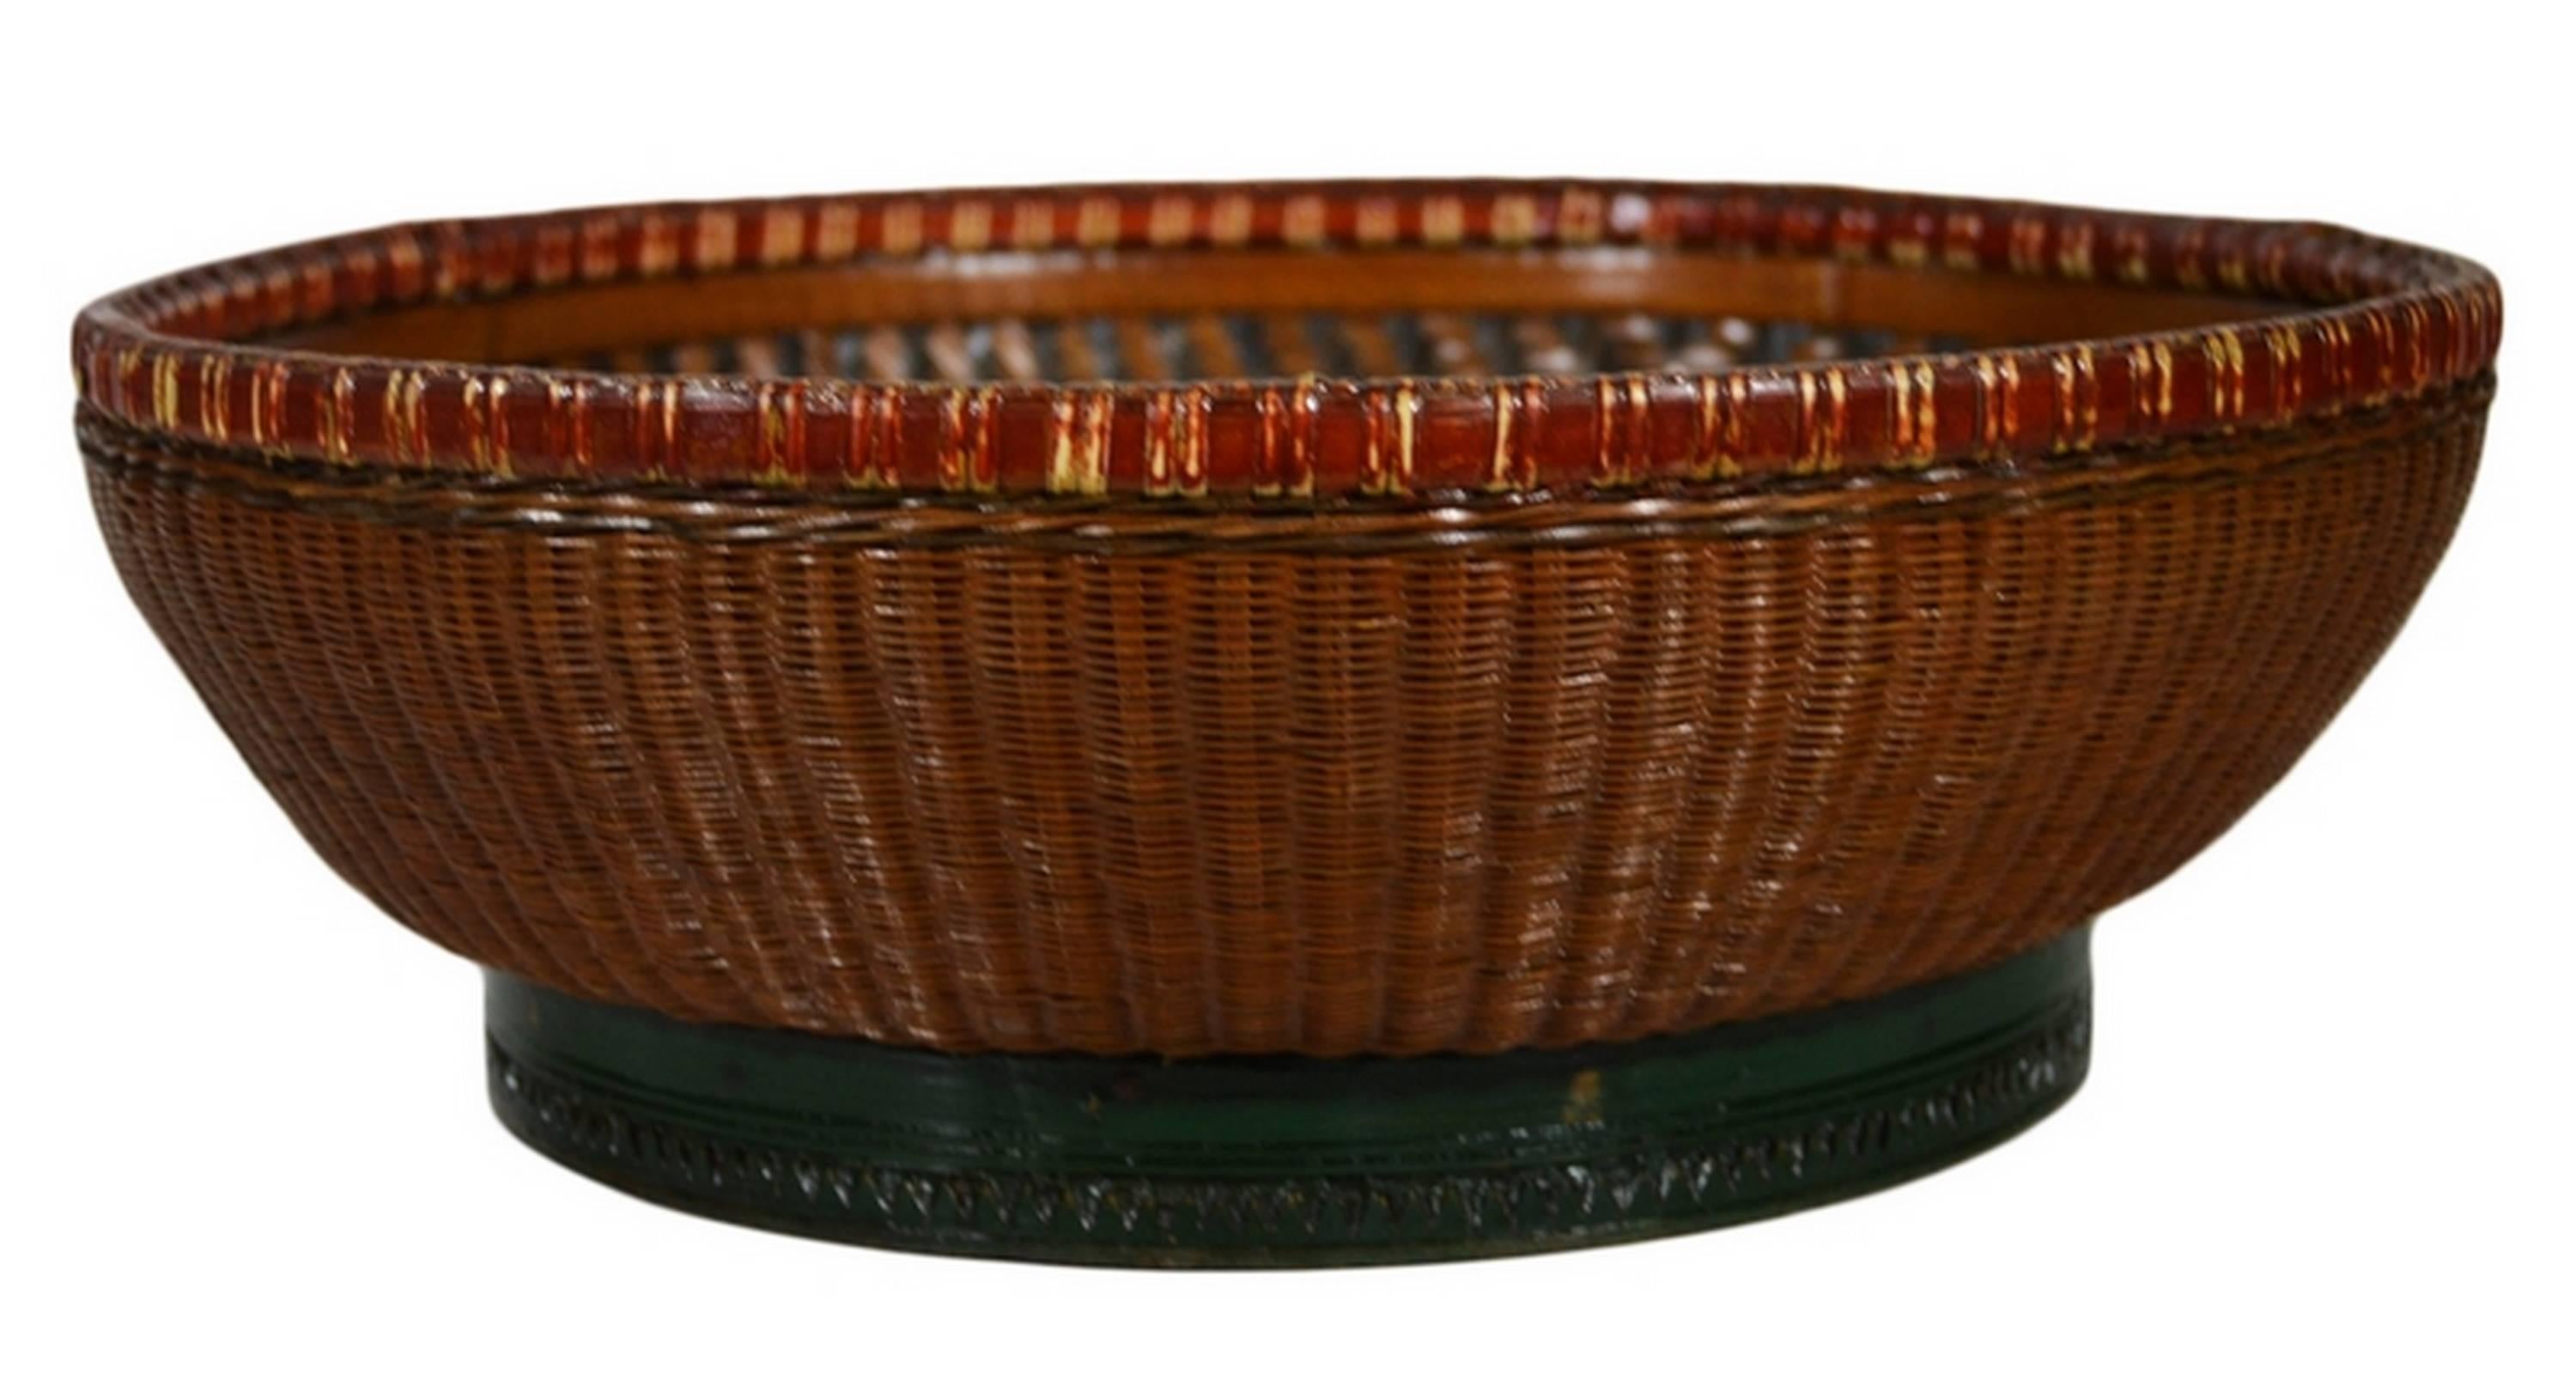 A 19th century Chinese grain basket hand woven of bamboo and rattan. Baskets such as these were often used to store grain in 19th century China. It features a bamboo base and rim with a hand woven, interlaced rattan on the outside. Inside, the black